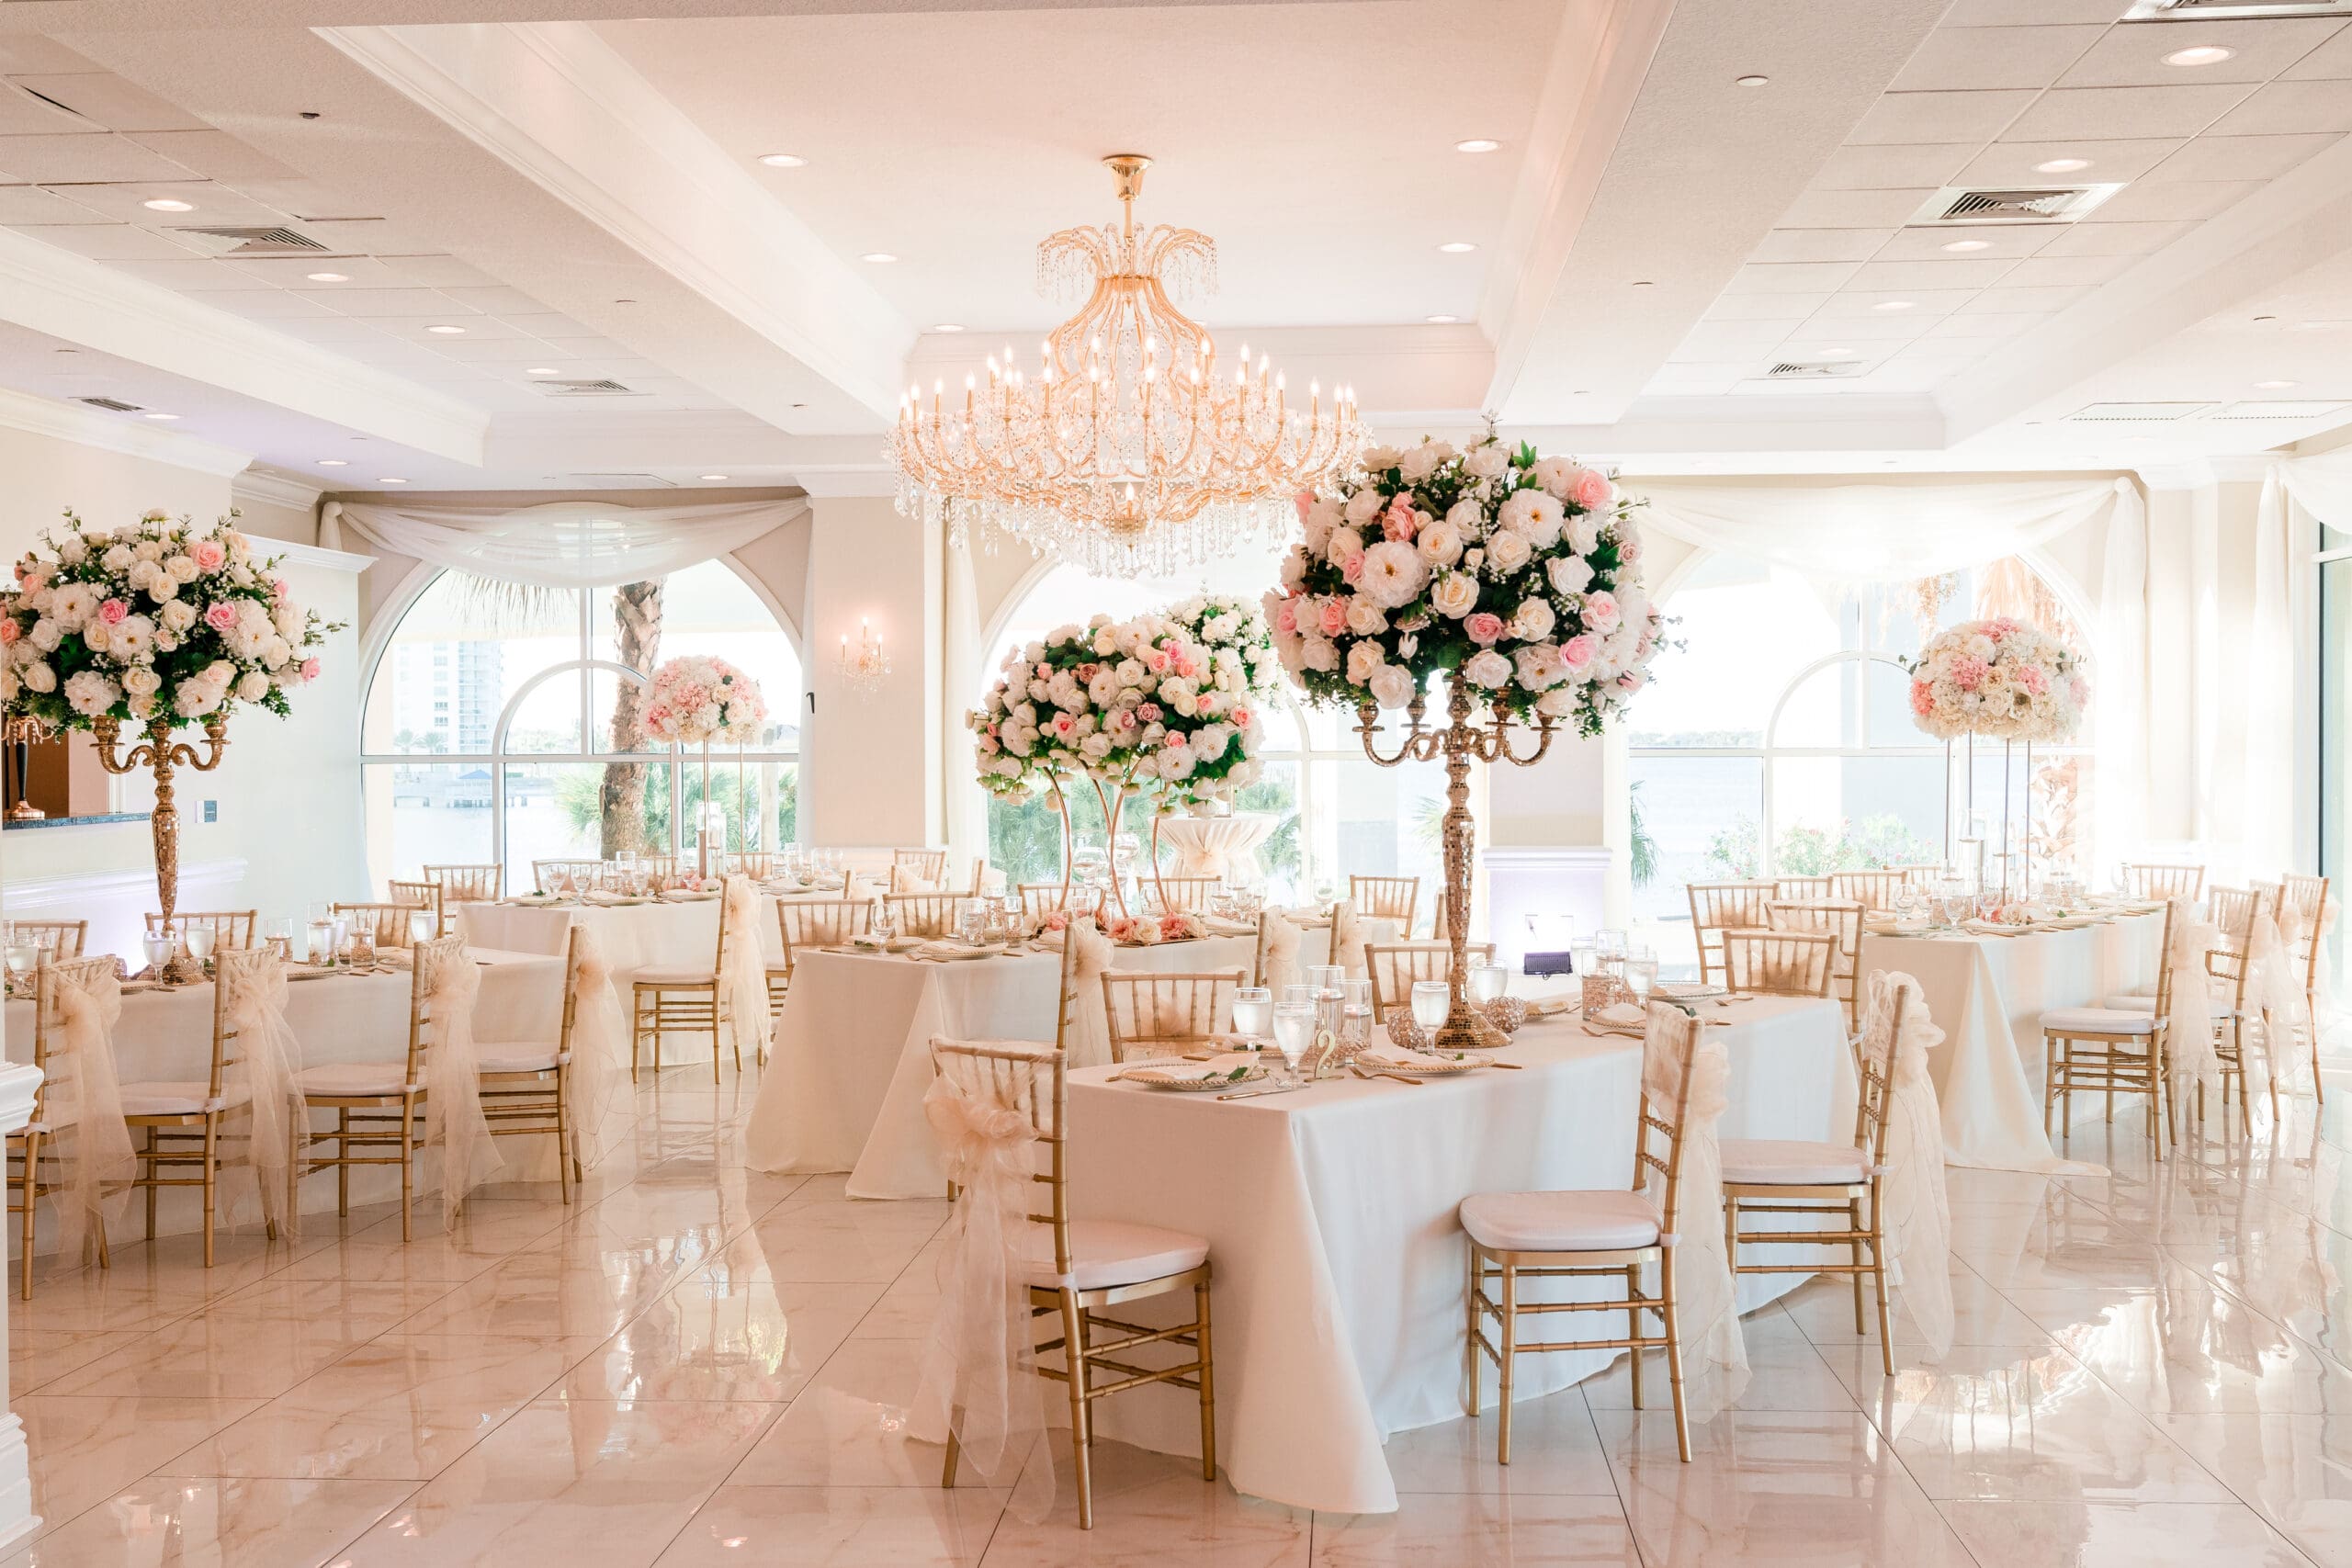 Wide shot of the Crystal Ballroom at Sunset Harbor, showcasing guests' tables adorned with bouquets of white and pink flowers, white chairs with bows and veil-like drapes, large windows allowing natural light to fill the room.